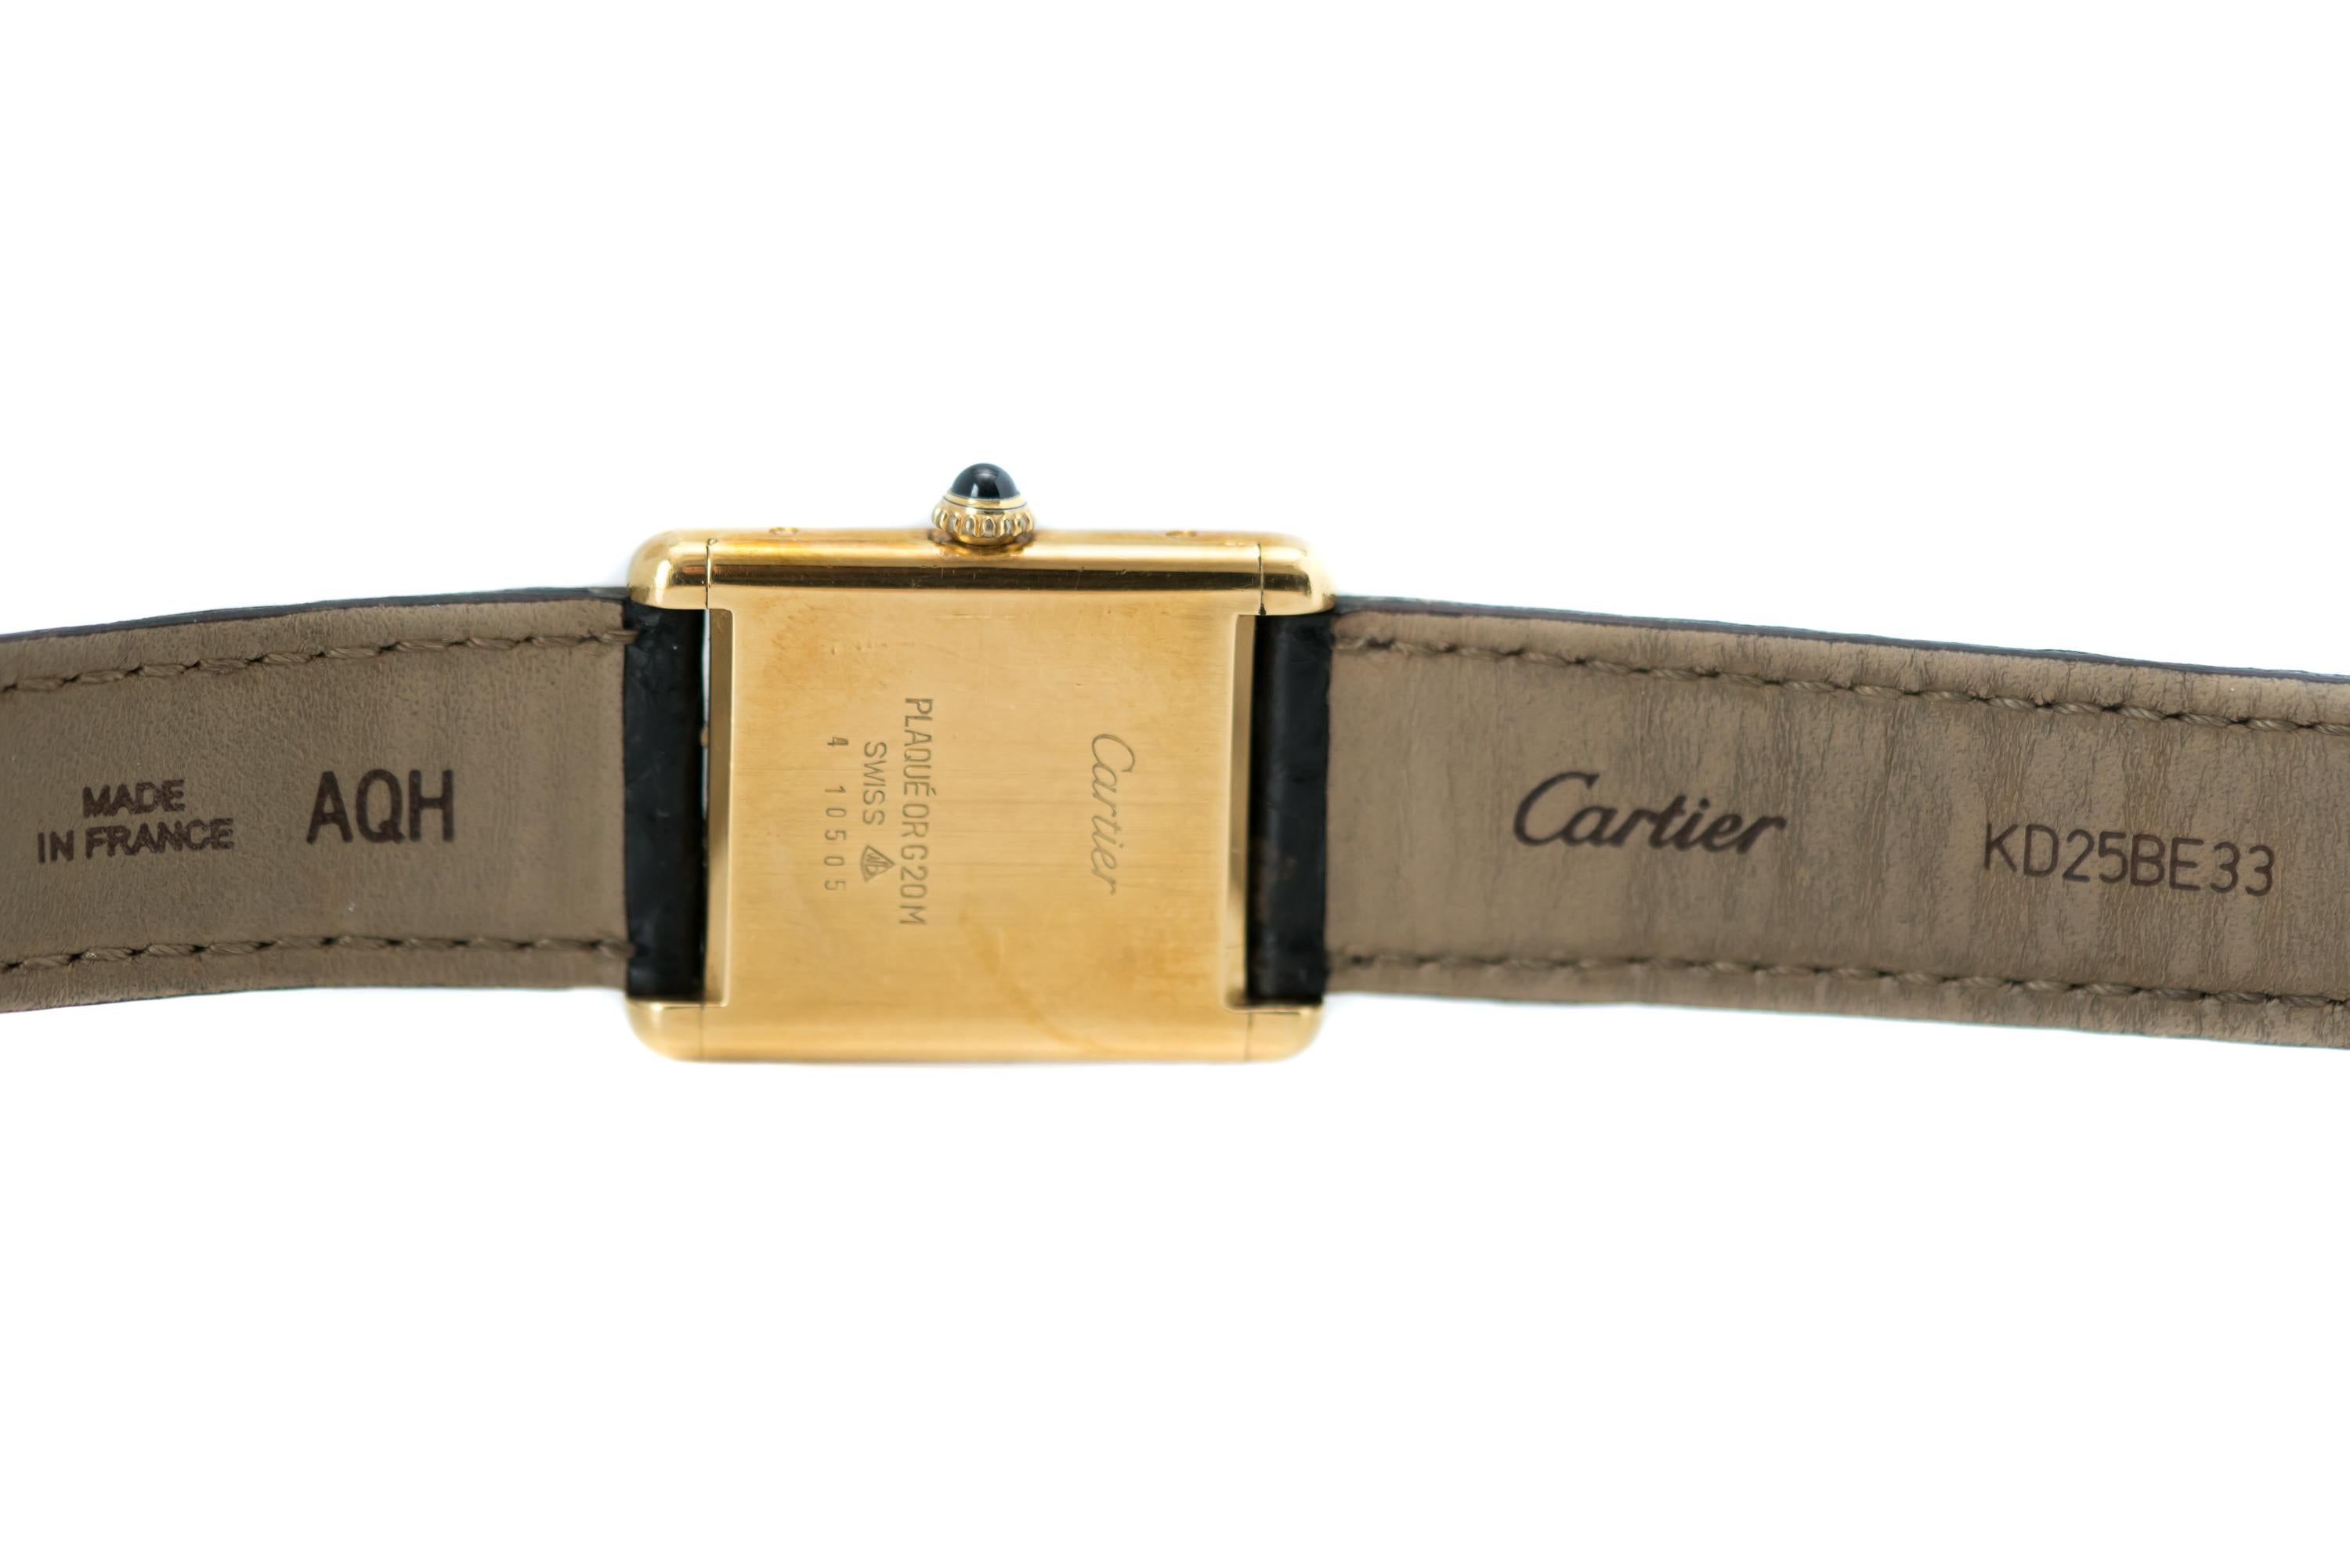 1950s Retro Cartier Tank Louis Watch - 18 Karat Yellow Gold over Sterling Silver

Features: 
Cartier Case, Crown and Strap
18 Karat Yellow Gold over Sterling Silver
Rounded Art Deco Lugs
23 x 23 millimeter case without lugs, without crown
30 x 26